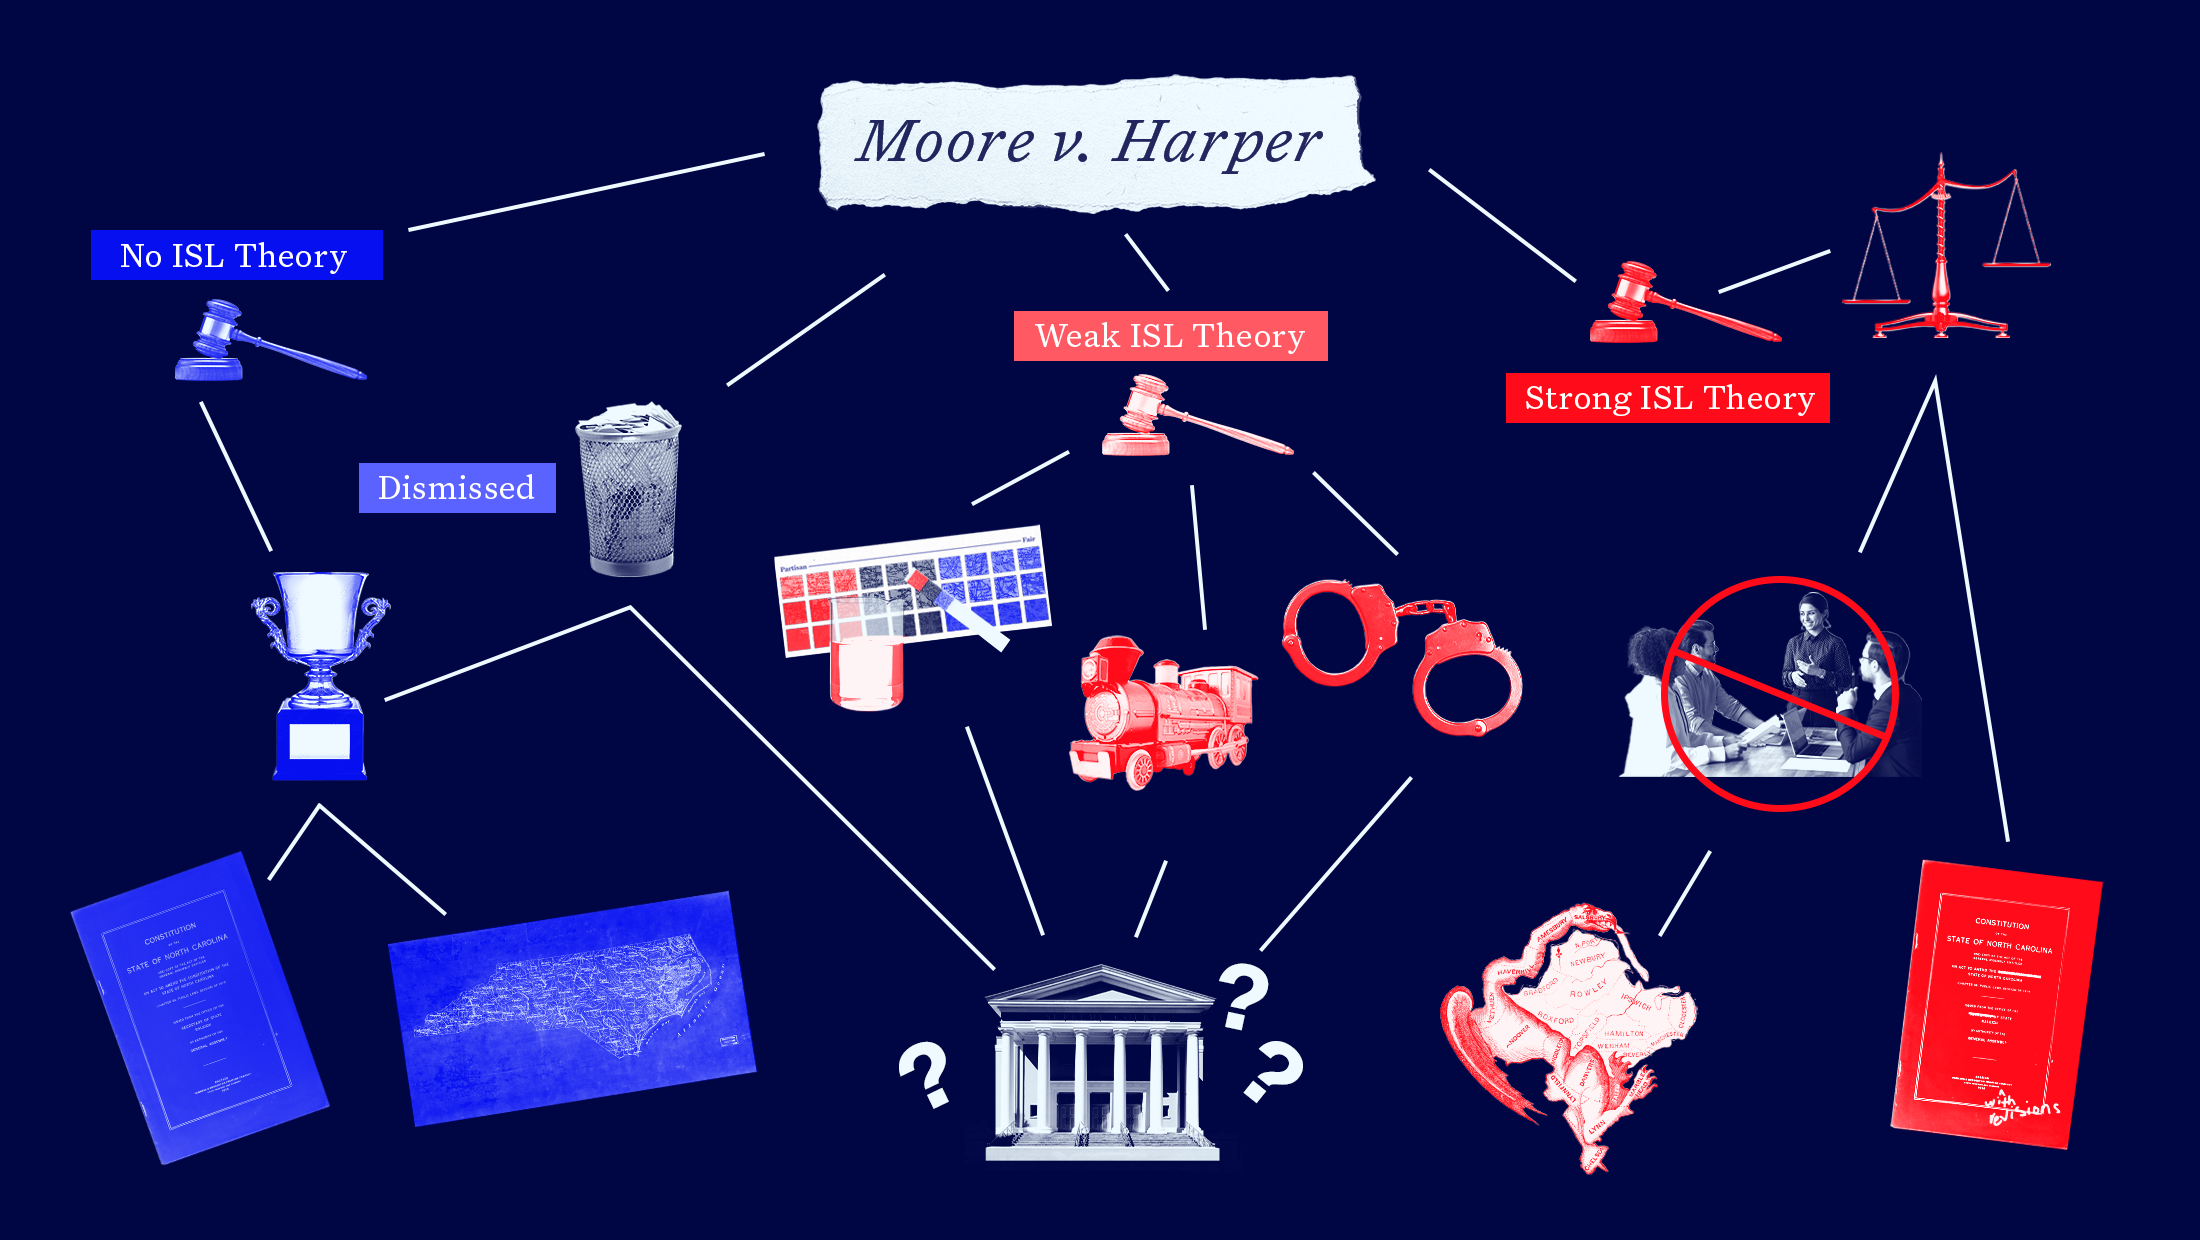 A decision tree mapping out all the possibilities that could stem from the Supreme Court case Moore v. Harper, with small graphical elements representing each outcome.